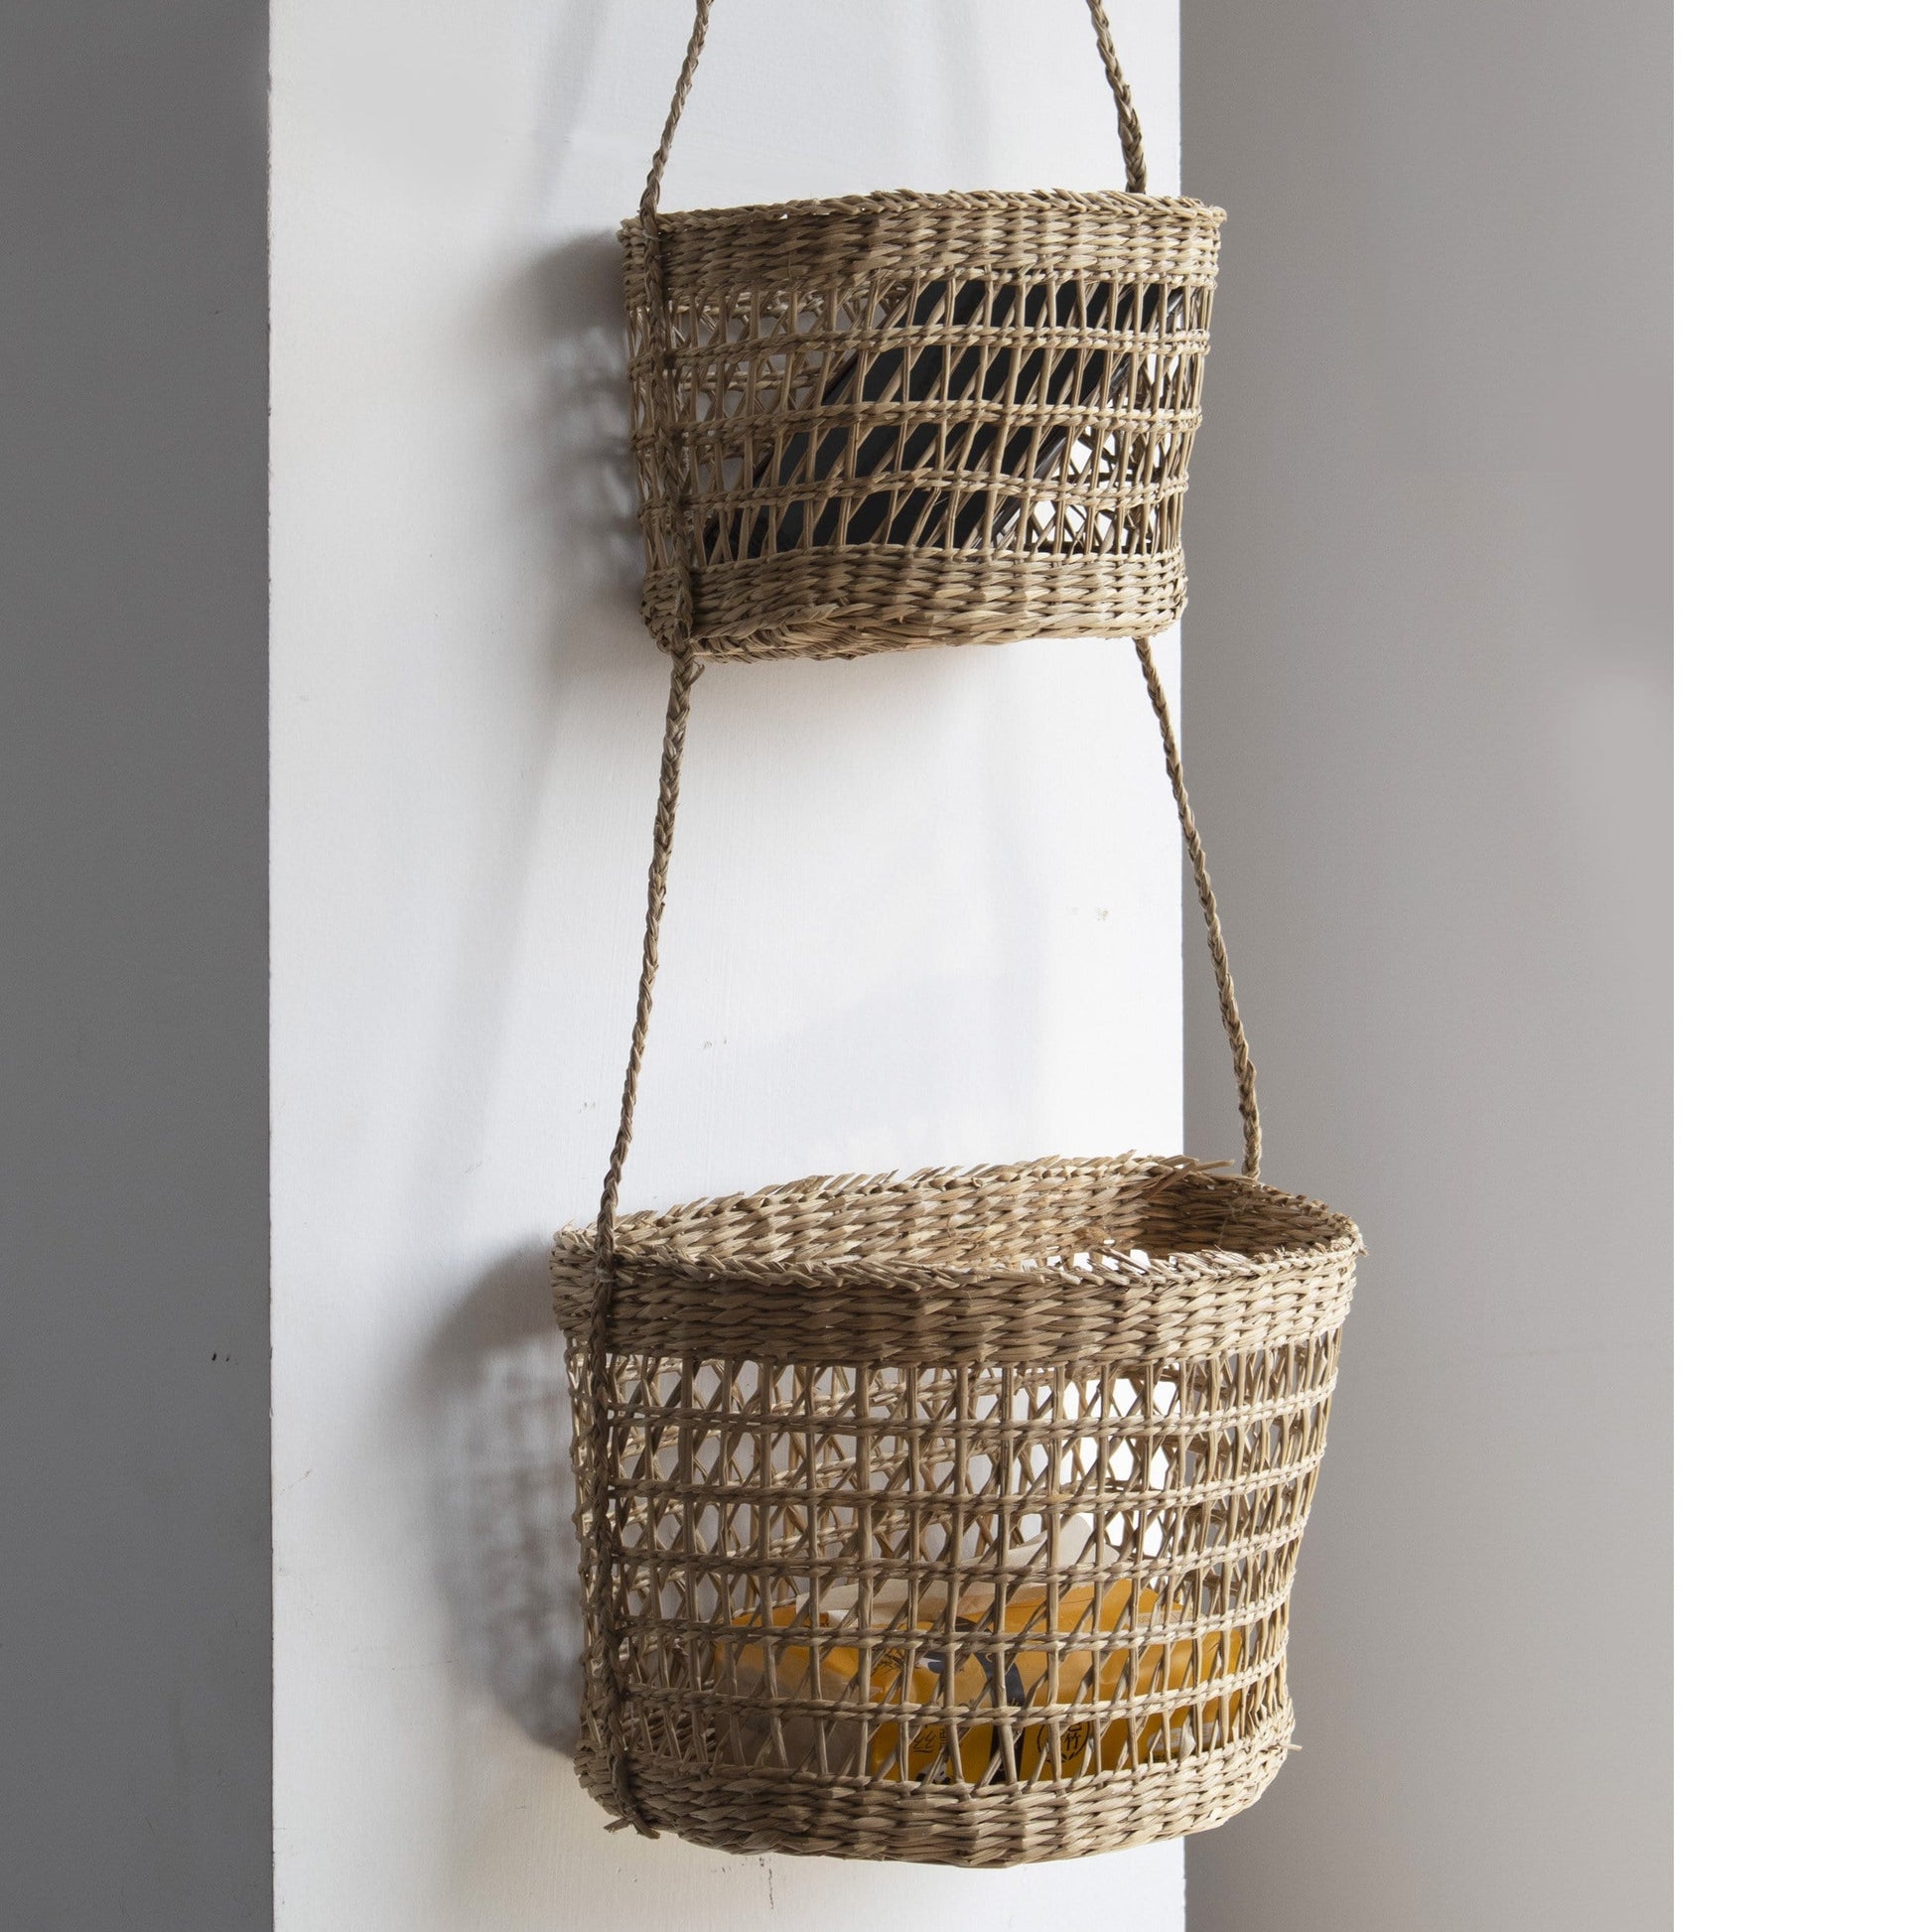 2-Tier Woven Wall Hanging Baskets for Storage and Plant Pot Holder - Almondscove